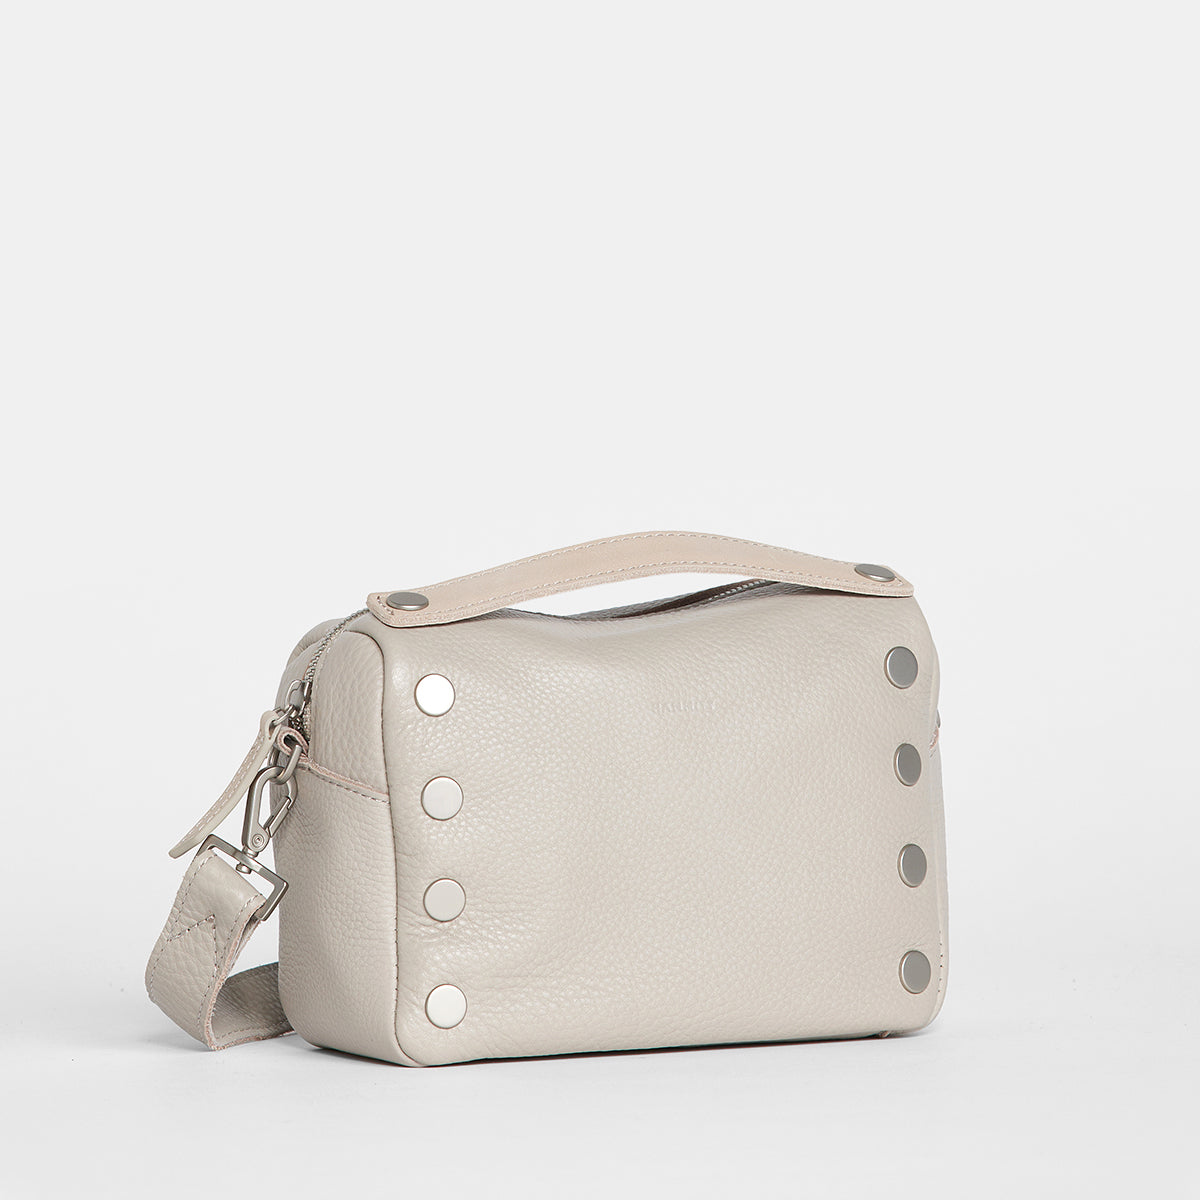 Evan-Crossbody-Paved-Grey-Front-View